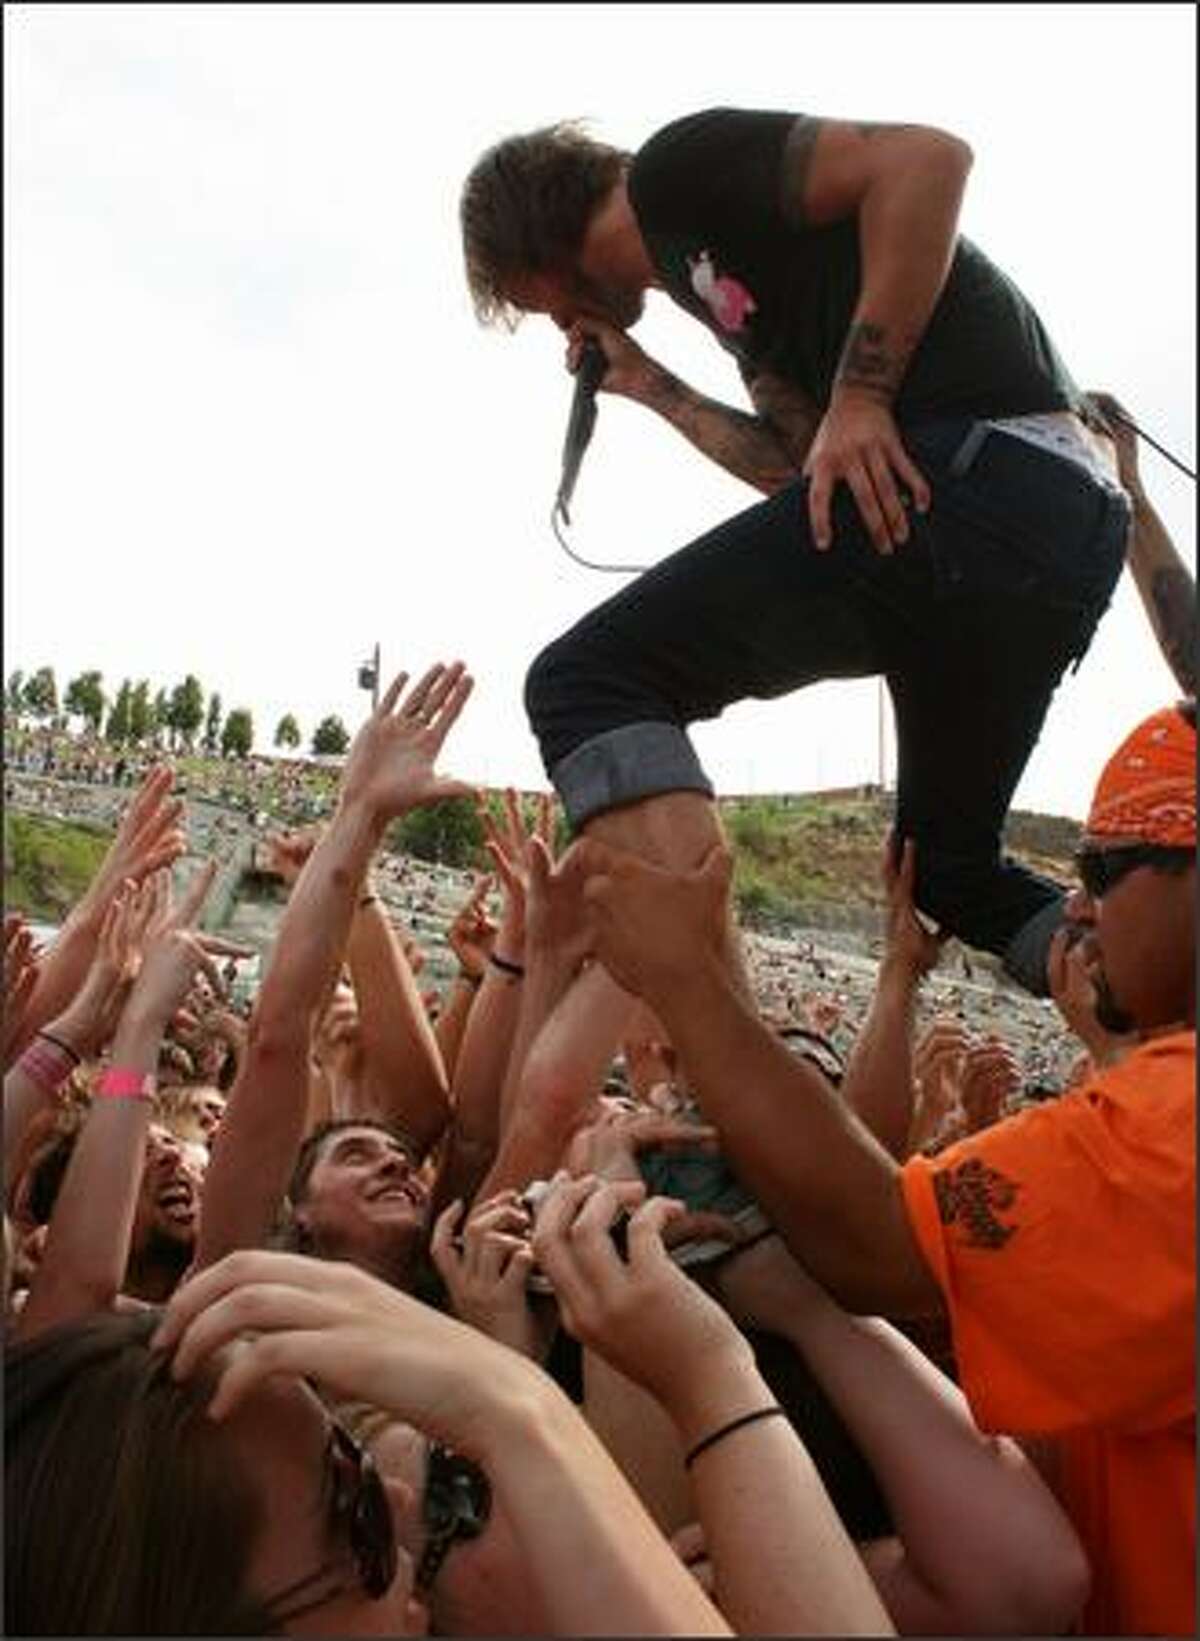 Craig Owens of Chiodos walks over a sea of raised hands at the Vans Warped Tour held at the Gorge Amphitheatre in George, Wash. Saturday, August 18, 2007.